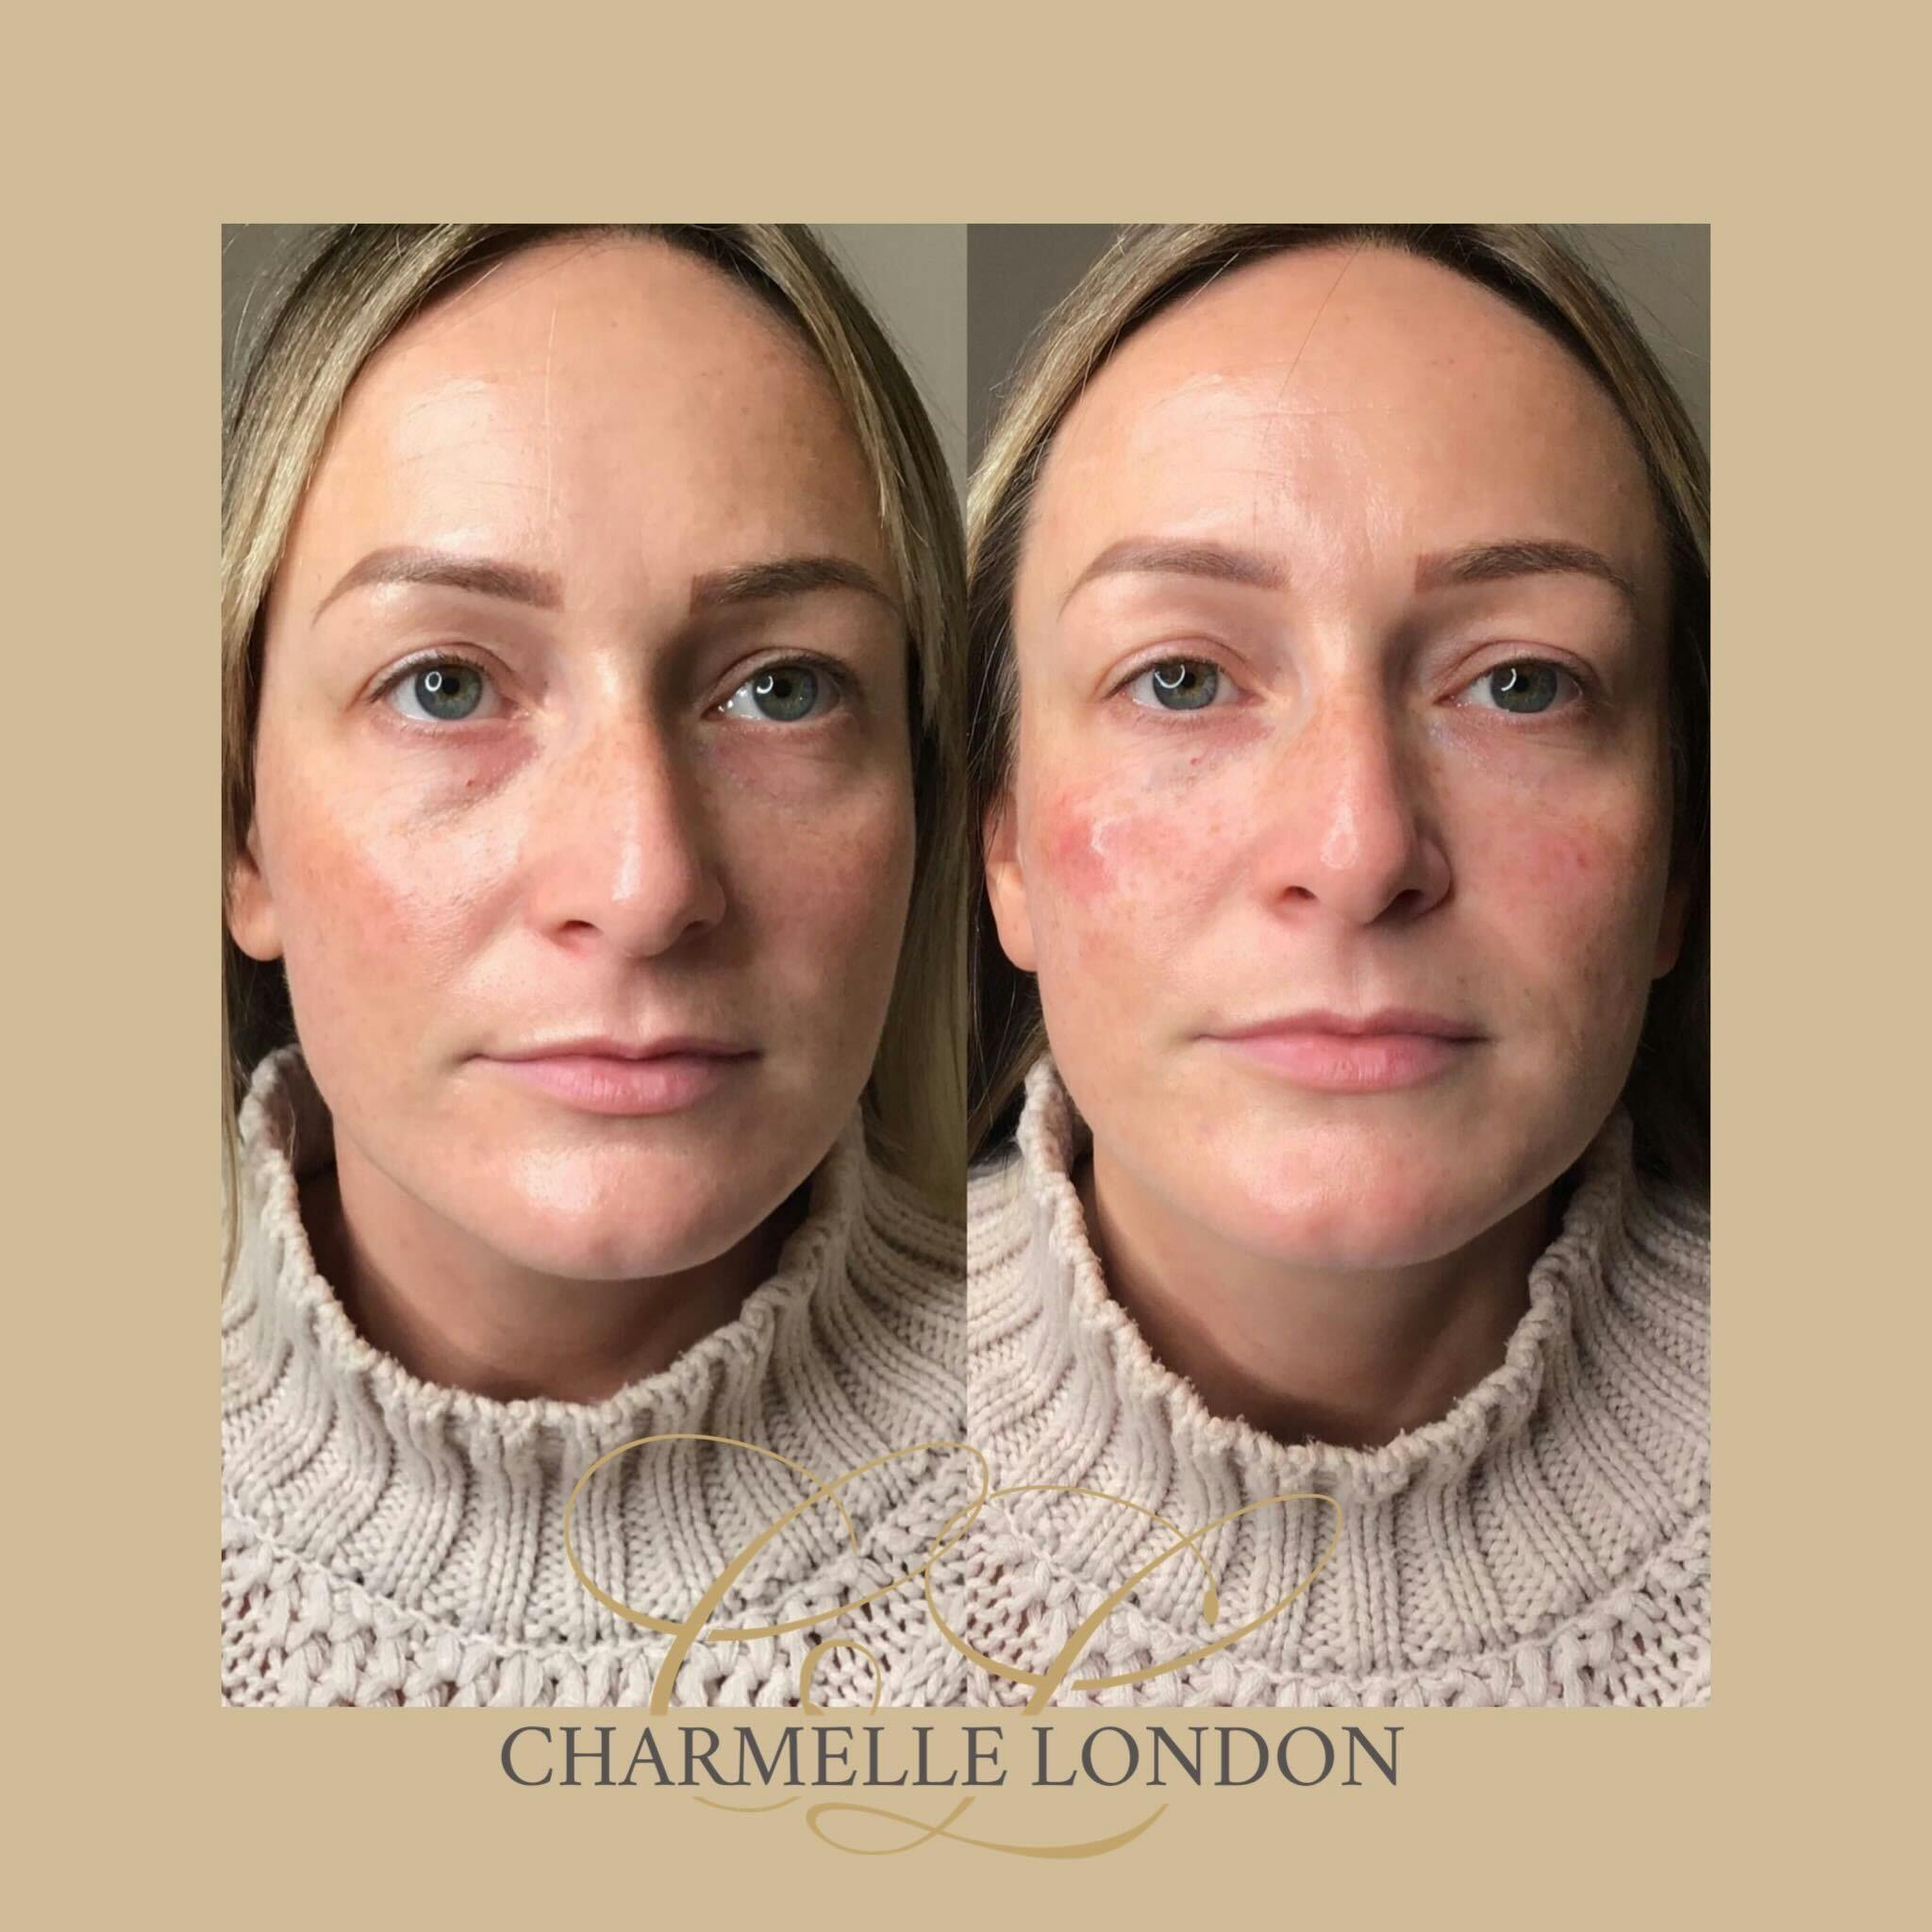 Ageing is one of the most common causes of dark circles or bags under the eyes. As we age, the fat pockets become larger, or protrude, leading to dark shadows beneath the eyes.